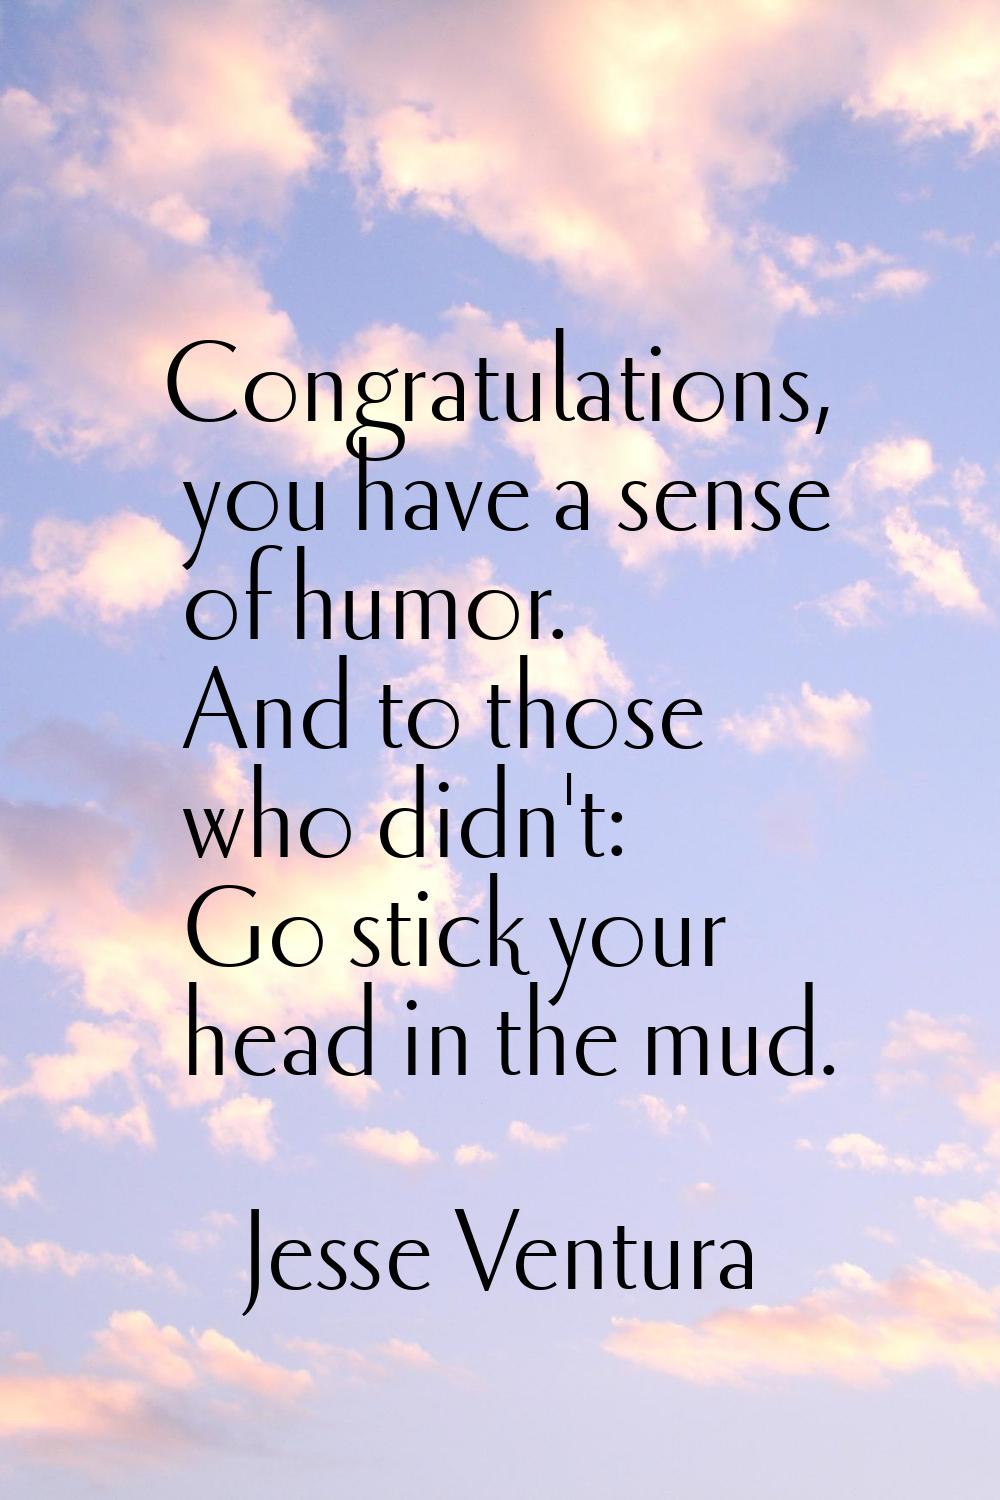 Congratulations, you have a sense of humor. And to those who didn't: Go stick your head in the mud.